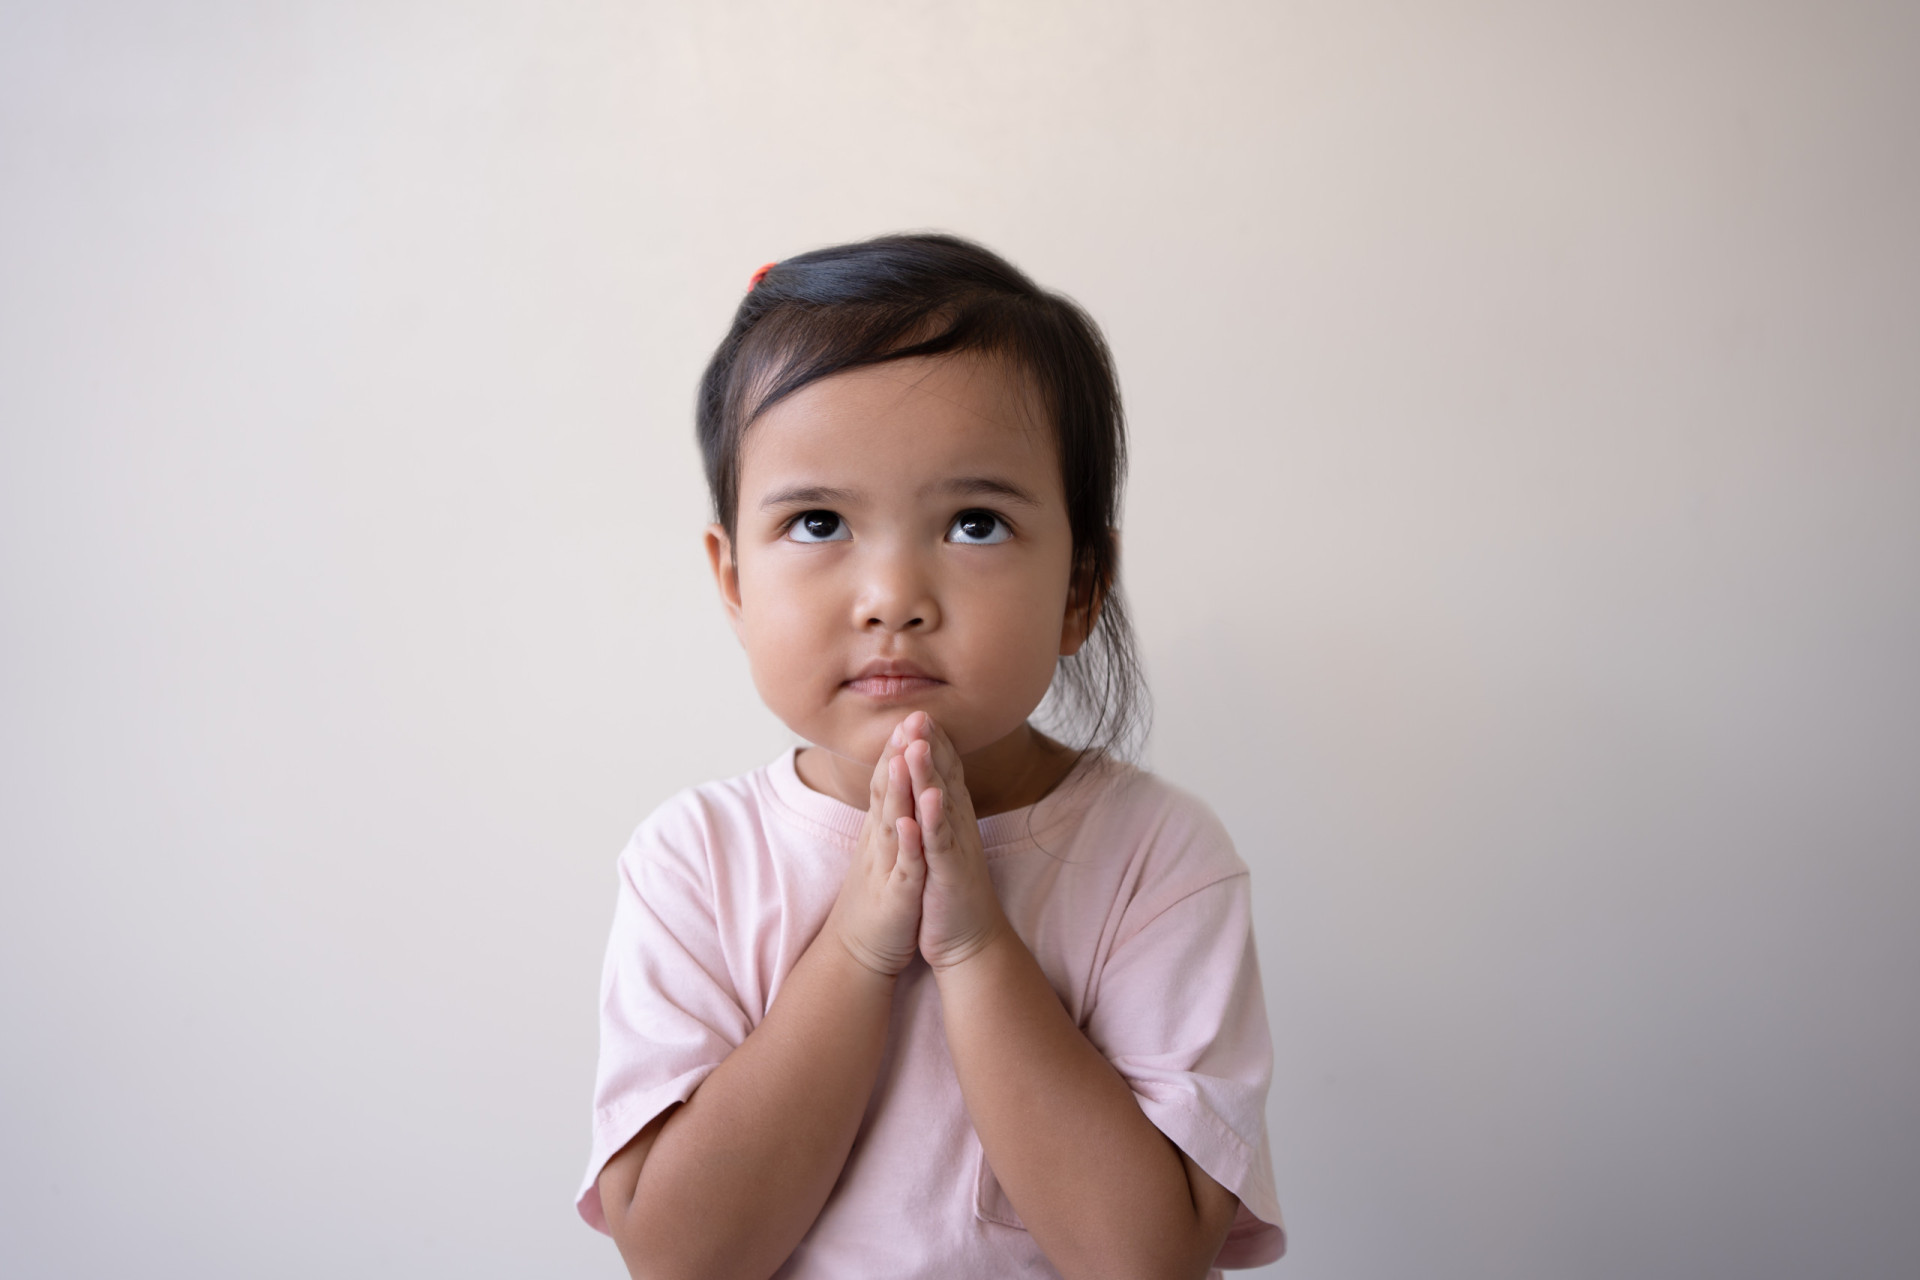 <p>Teaching children to apologize and forgive is like giving them the keys to healthier relationships. Saying "sorry" and accepting apologies helps mend small rifts and build strong bonds.</p><p>You may also like:<a href="https://www.starsinsider.com/n/157708?utm_source=msn.com&utm_medium=display&utm_campaign=referral_description&utm_content=588009en-en"> The most shocking scandals in sports history</a></p>